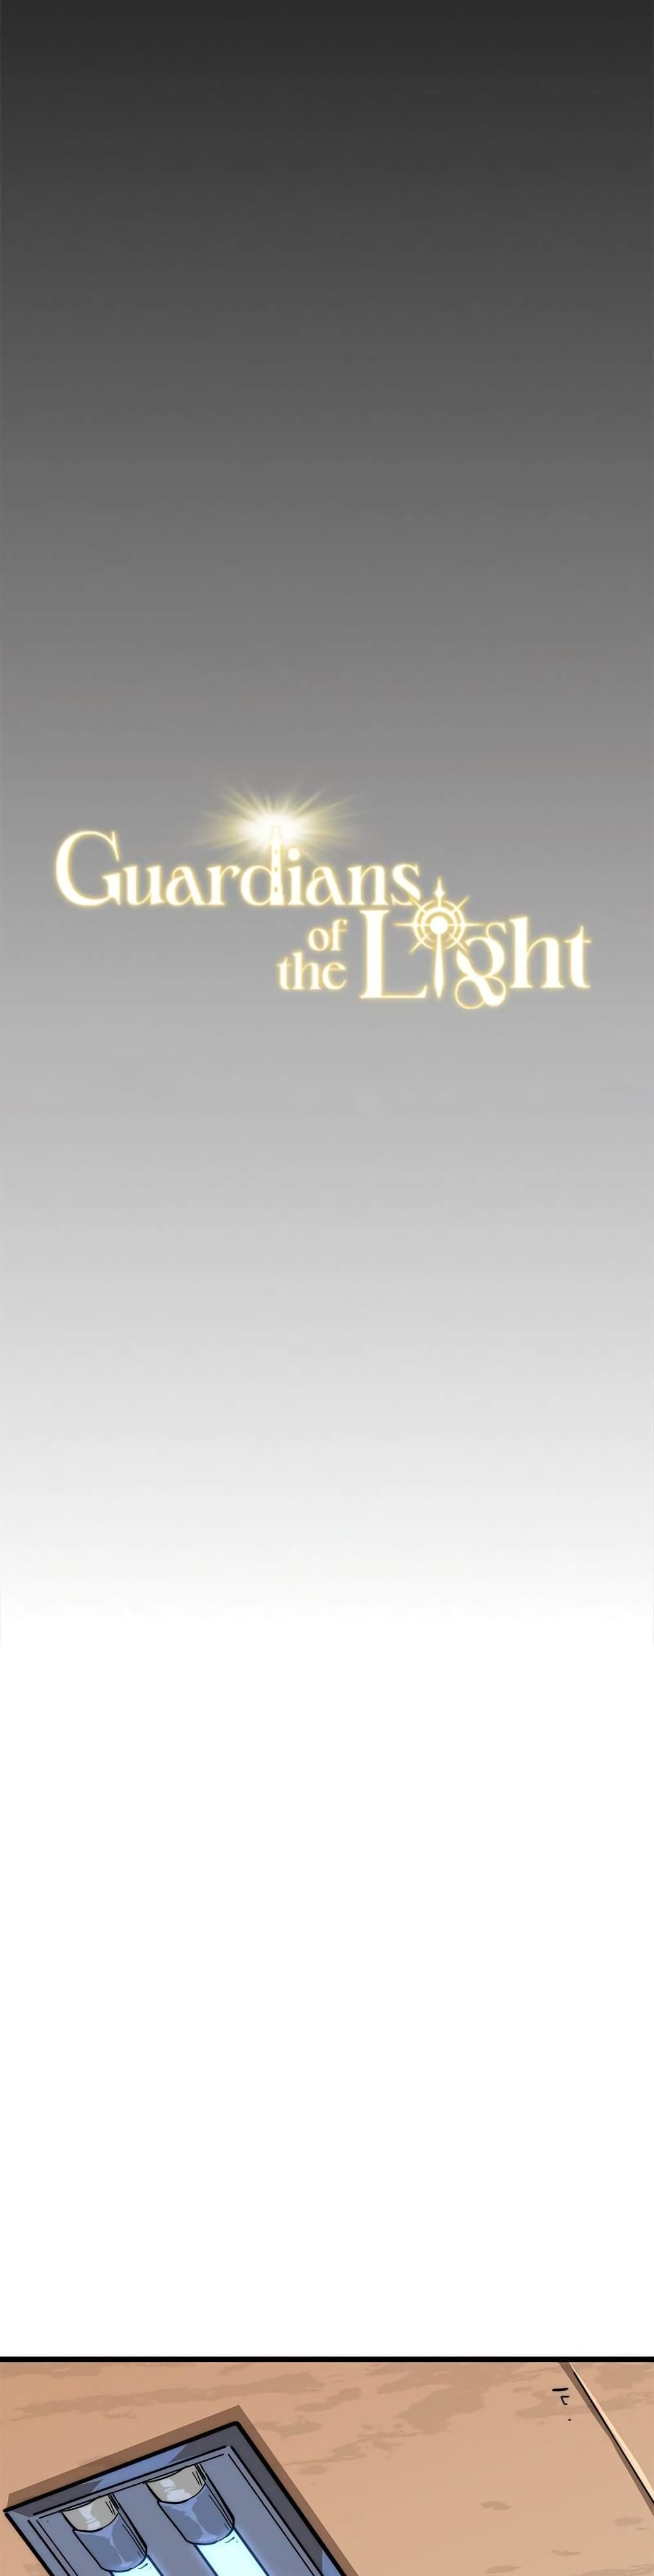 Guardians of the Light 1 06